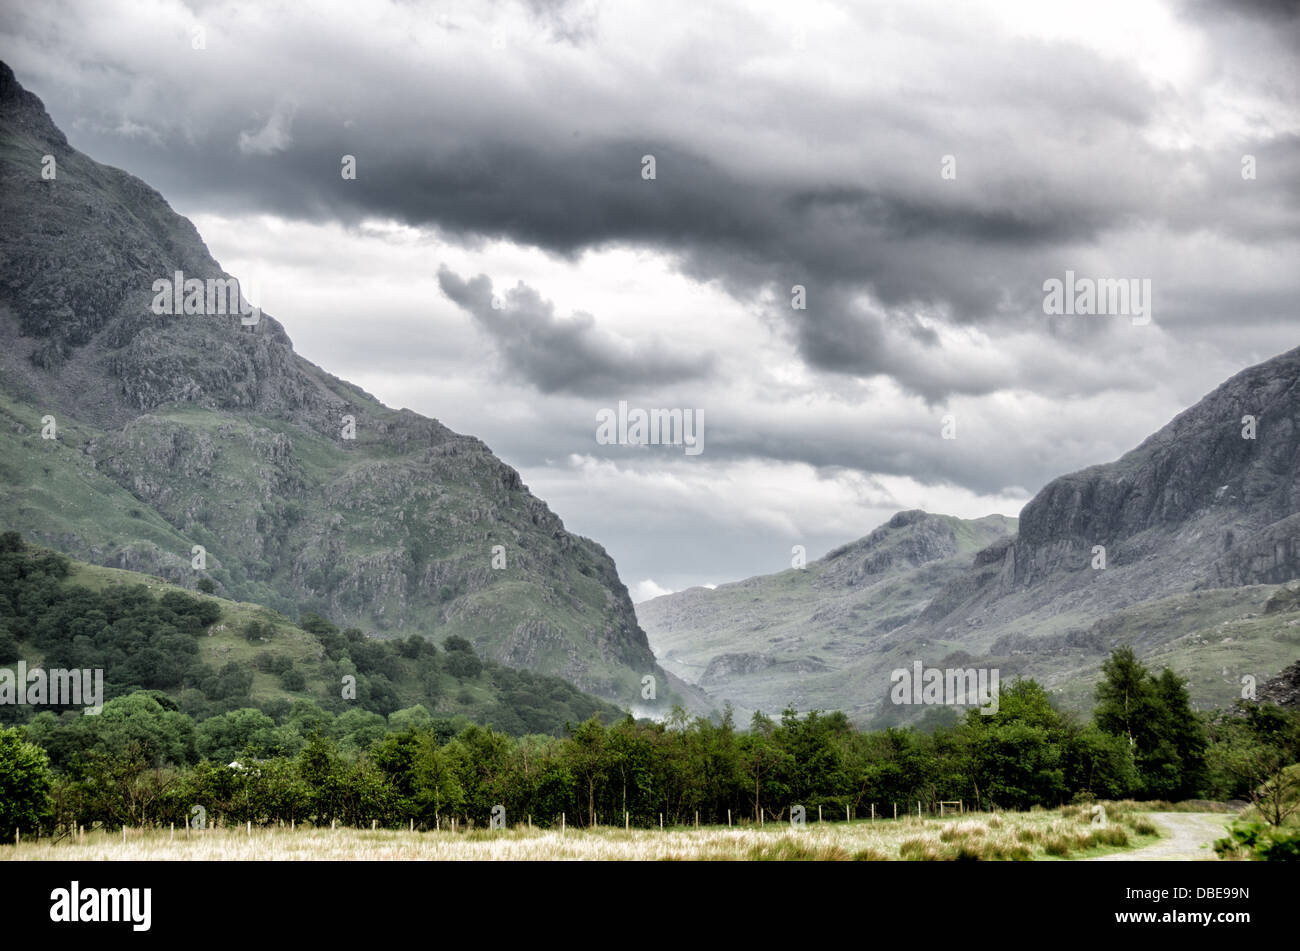 SNOWDONIA NATIONAL PARK, Wales - The rugged landscape of the mountains in the north of Snowdonia National Park, Wales, along the beautiful A4086 road. Stock Photo